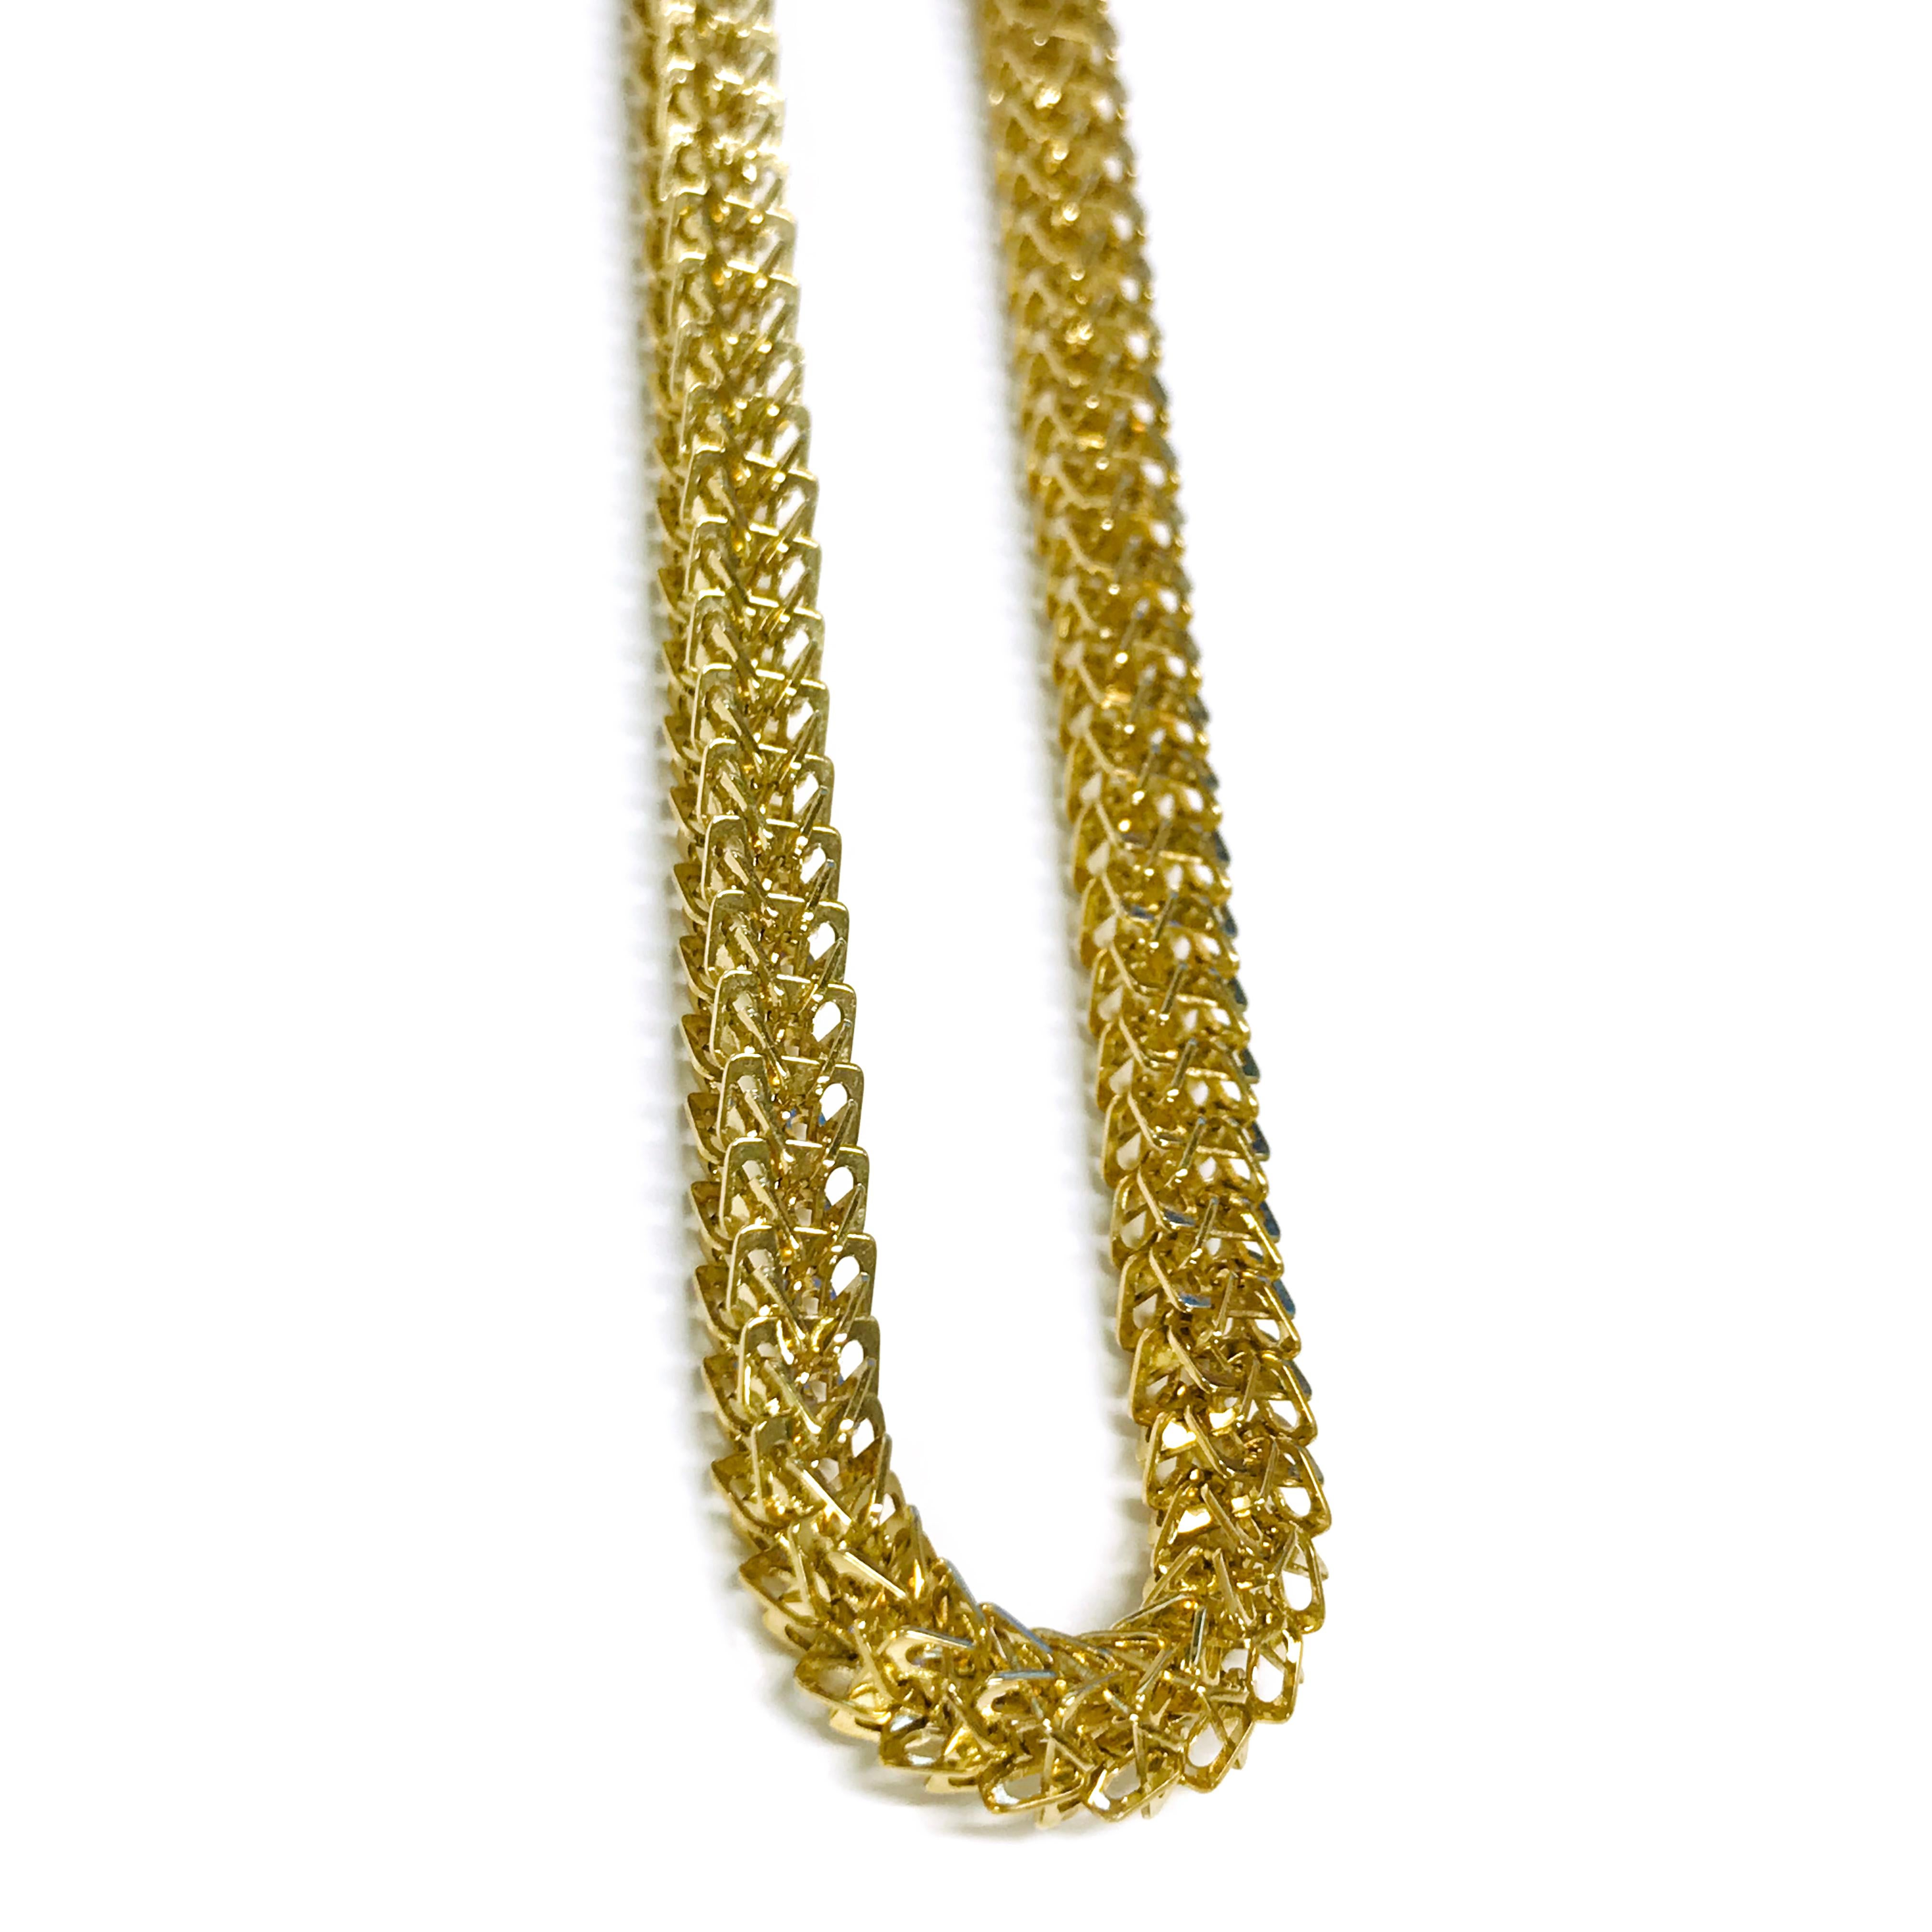 14 Karat Gold Galaxy Link Choker Necklace. The width of the necklace is 4.5mm. Stamped on the clasp is Galaxy. The total gold weight of the necklace is 18.8 grams and the necklace is 16 inches long.